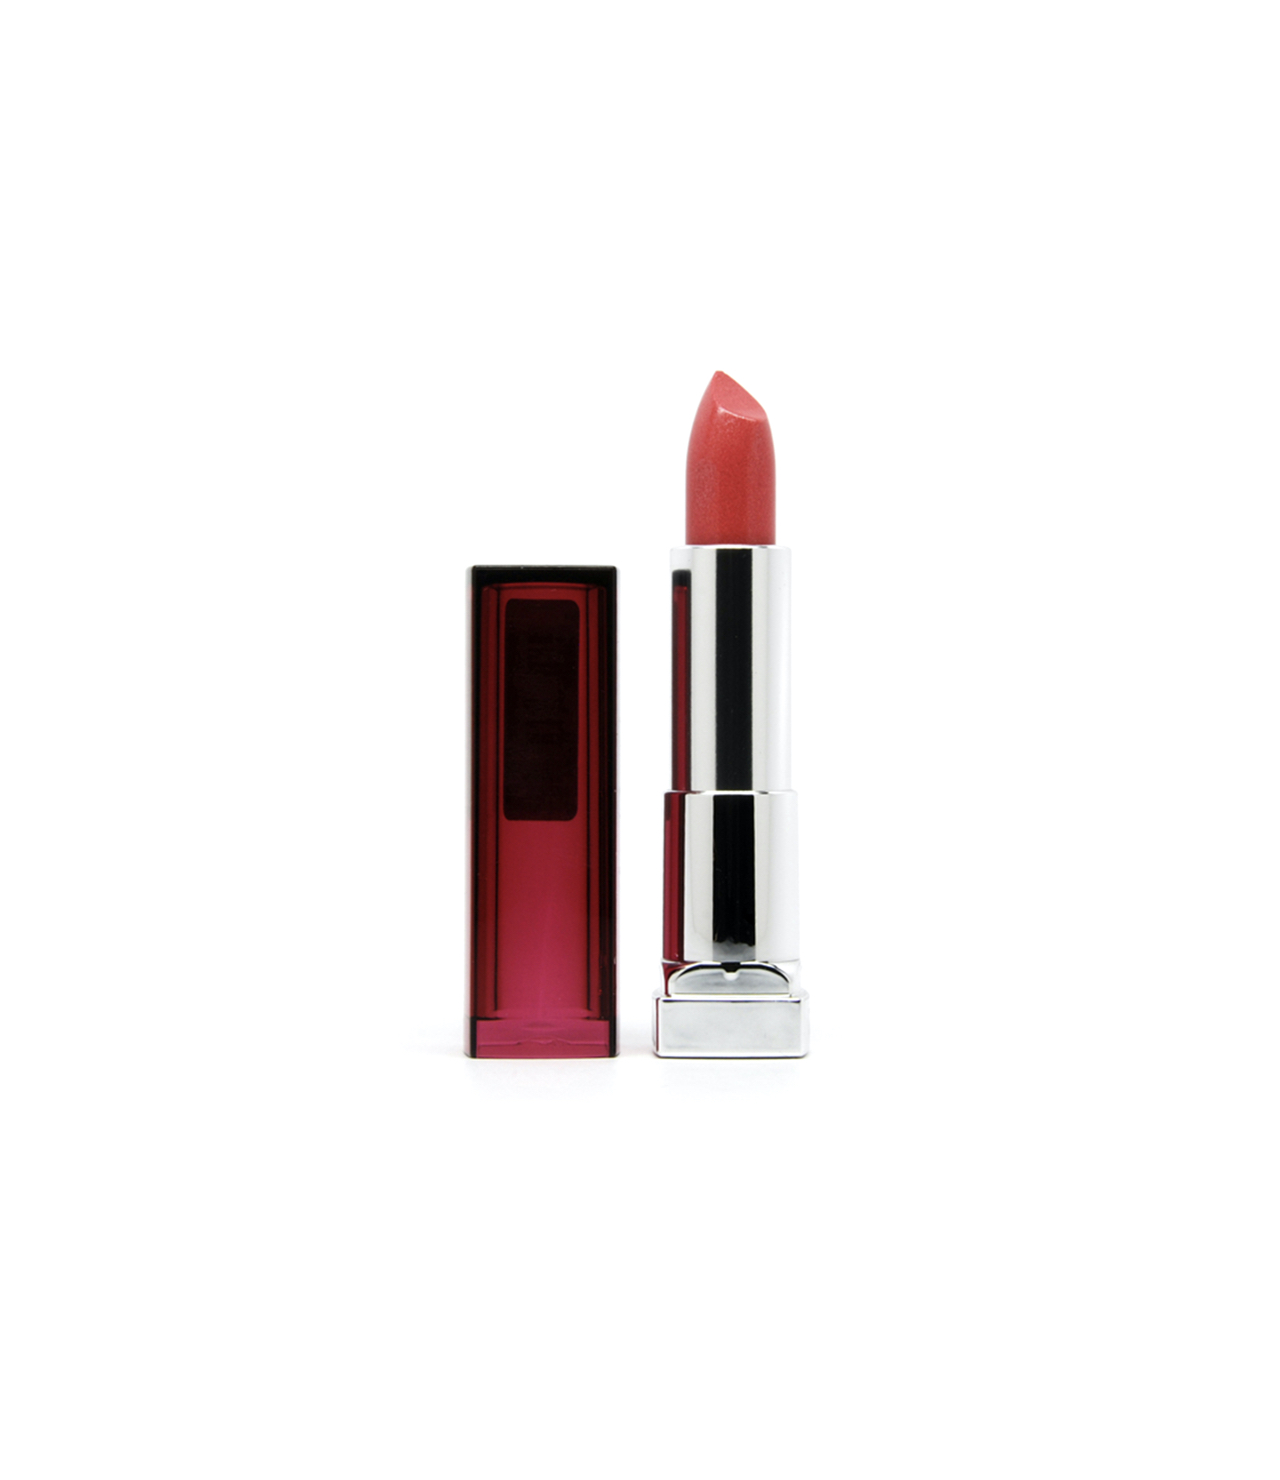 Product Photography of a red lip stick